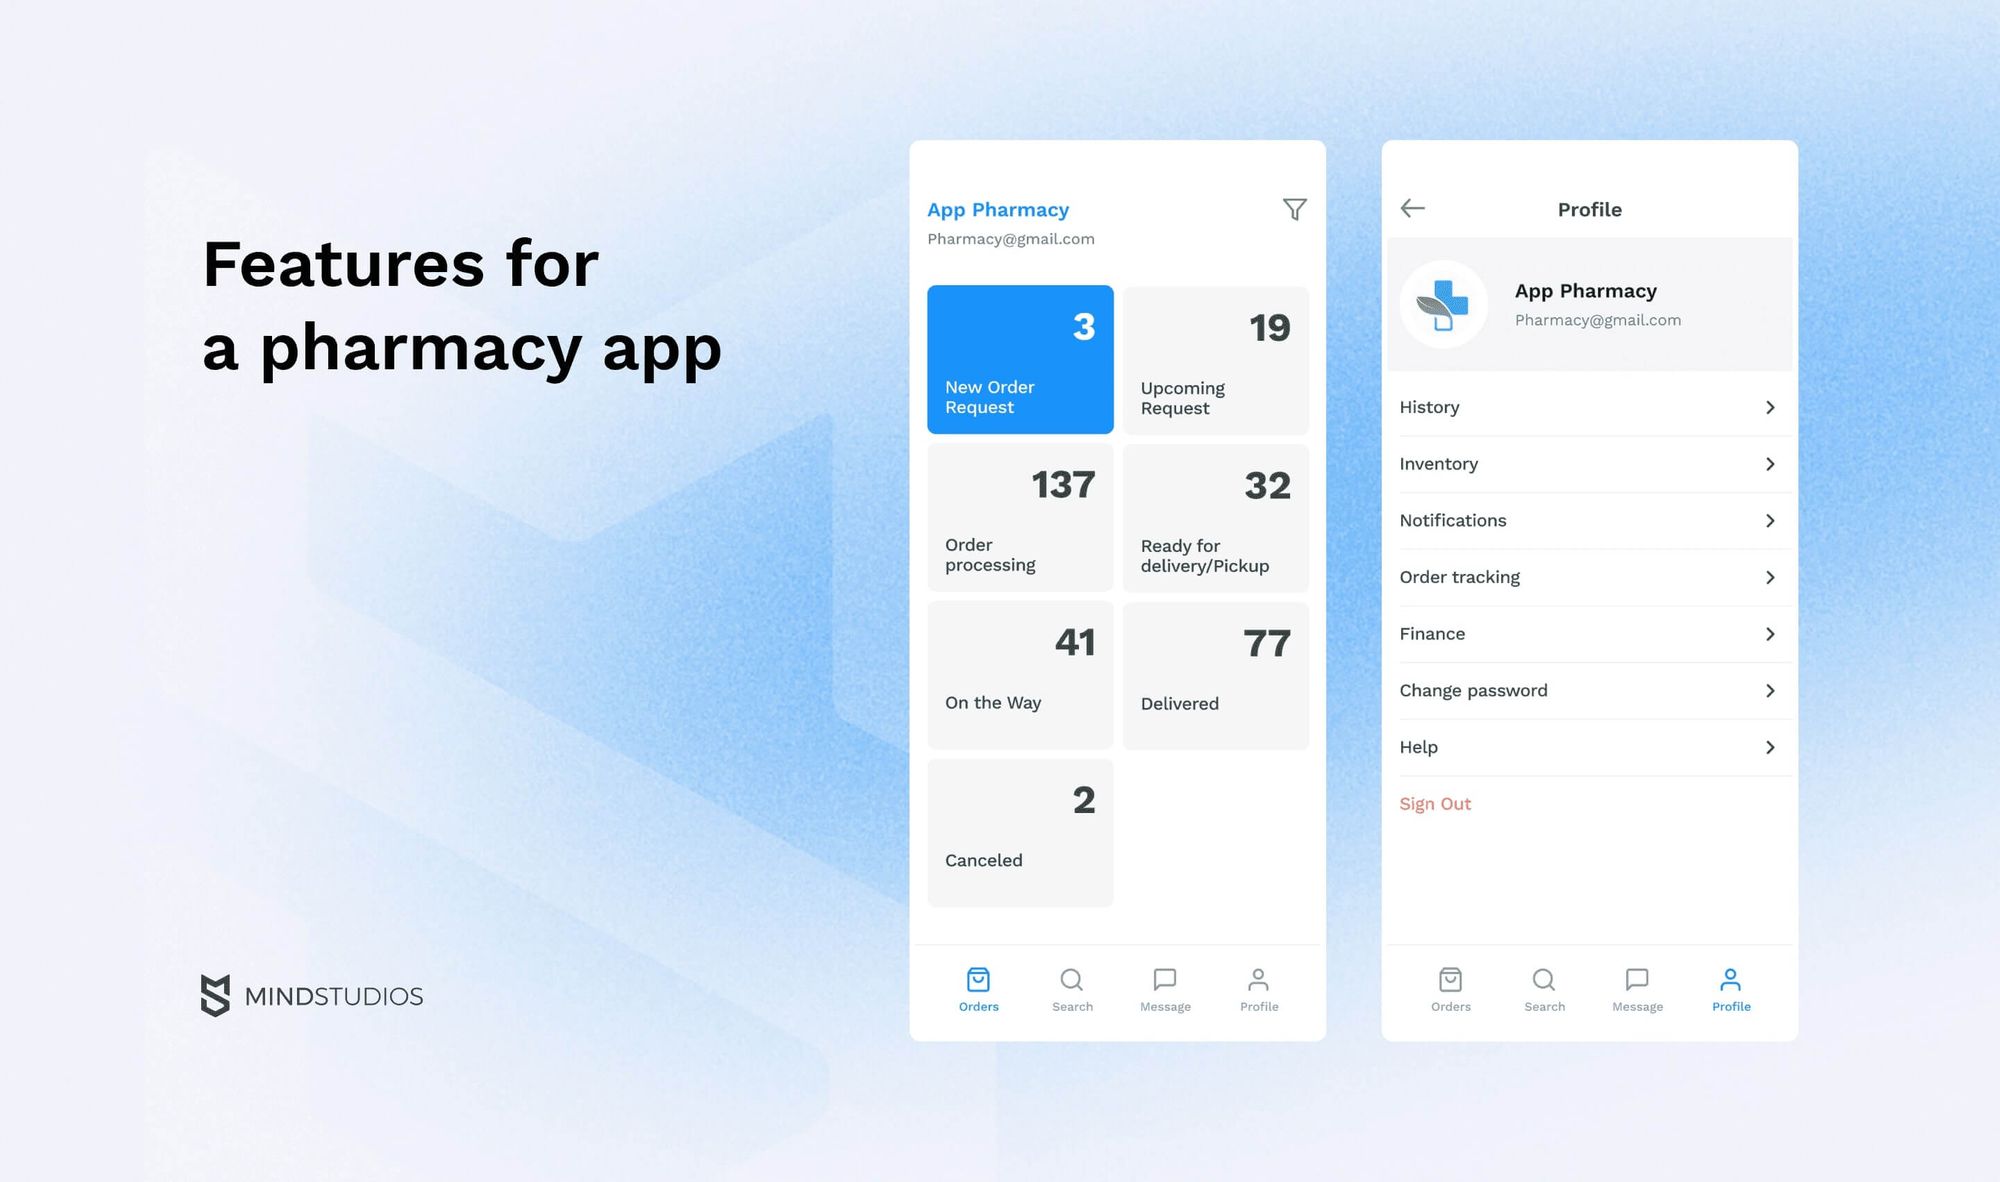 Features for a pharmacy app